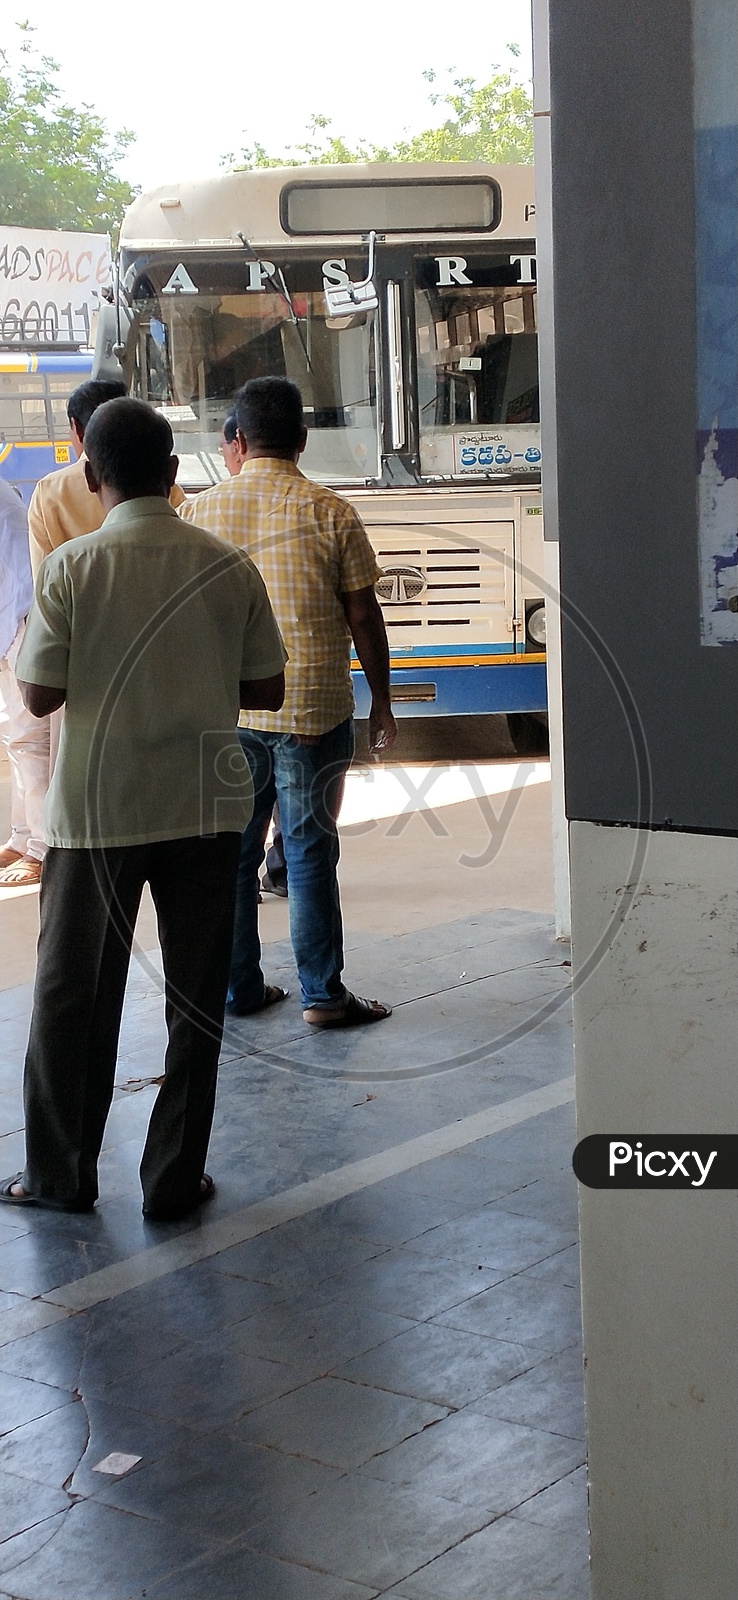 A man smoking cigarette in a bus stand which is a public offence